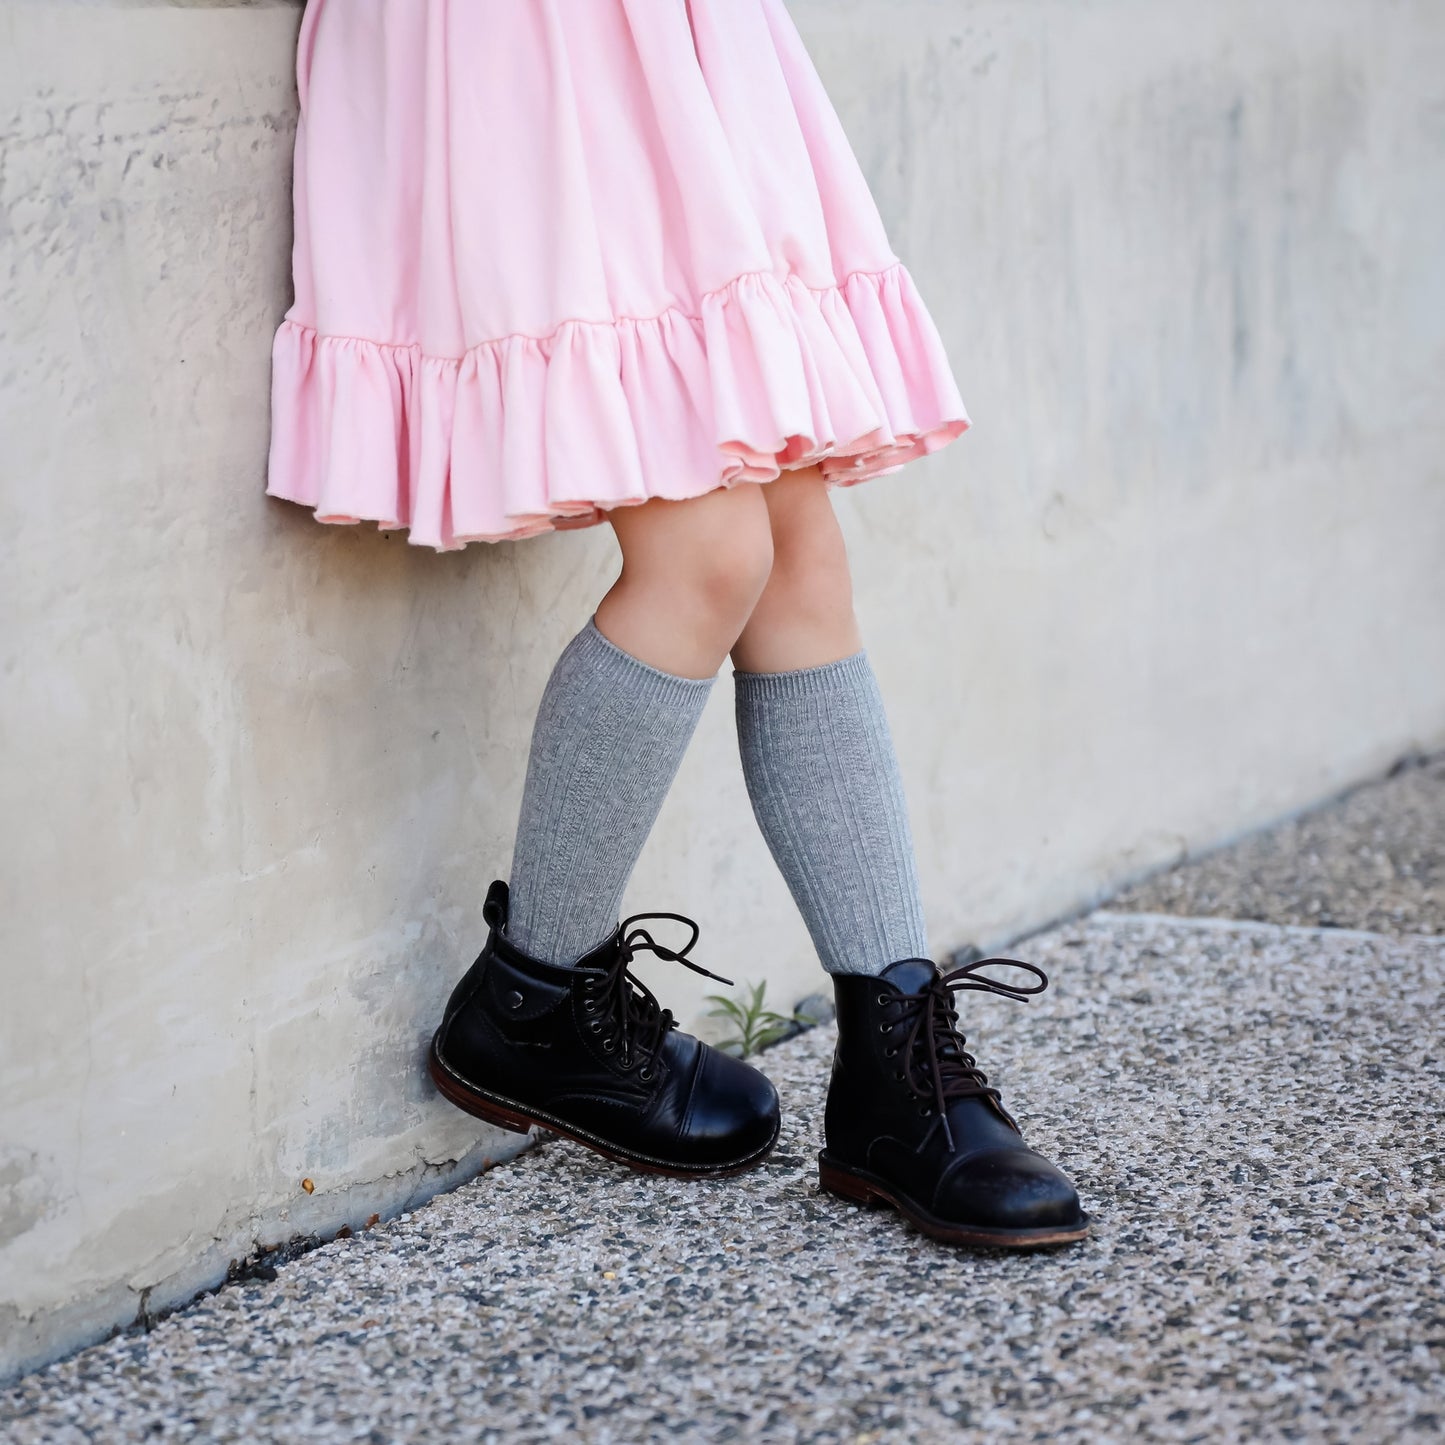 Cable Knit Knee High Socks - Neutrals Collection - Little Stocking Co